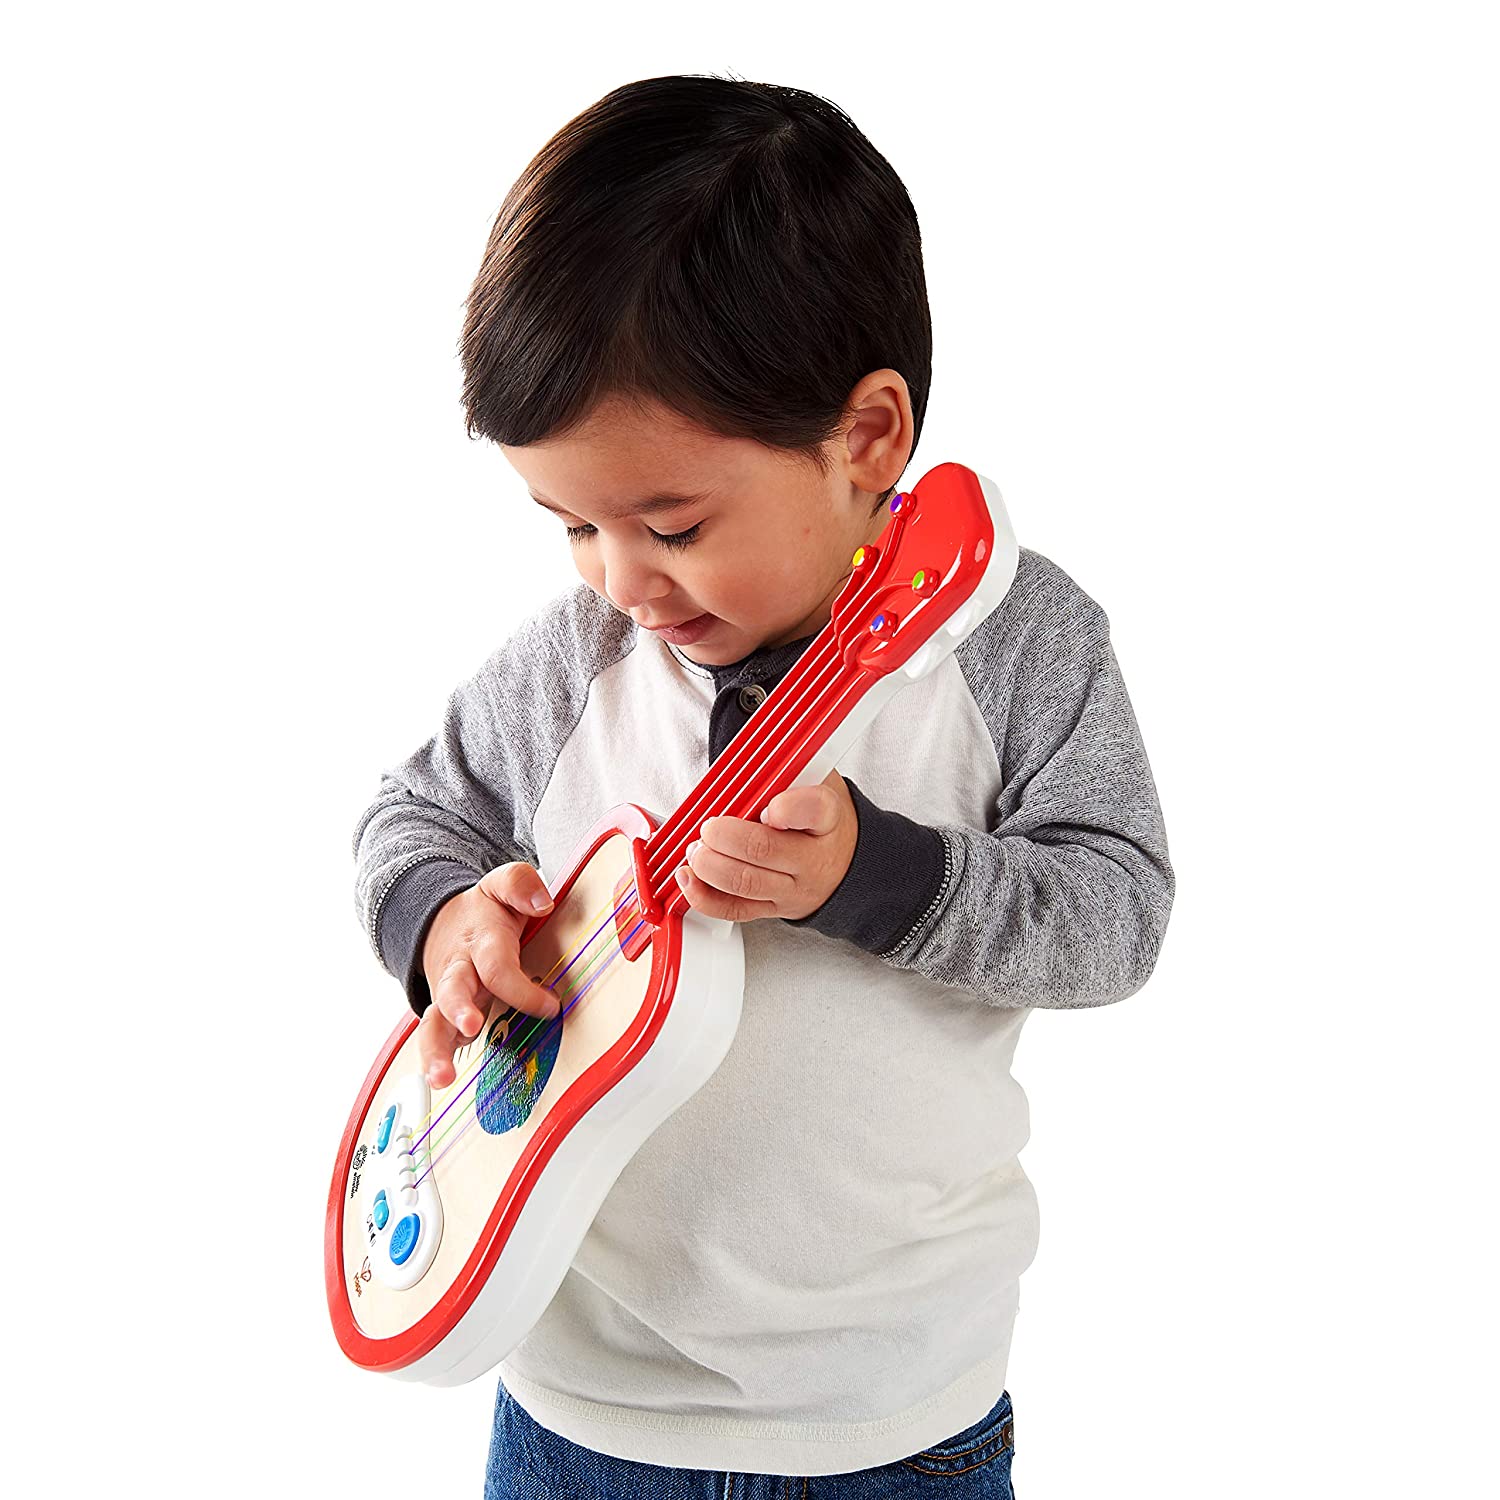 Baby Einstein Magic Touch Ukulele Wooden Musical Toy, Ages 12 months+, Red